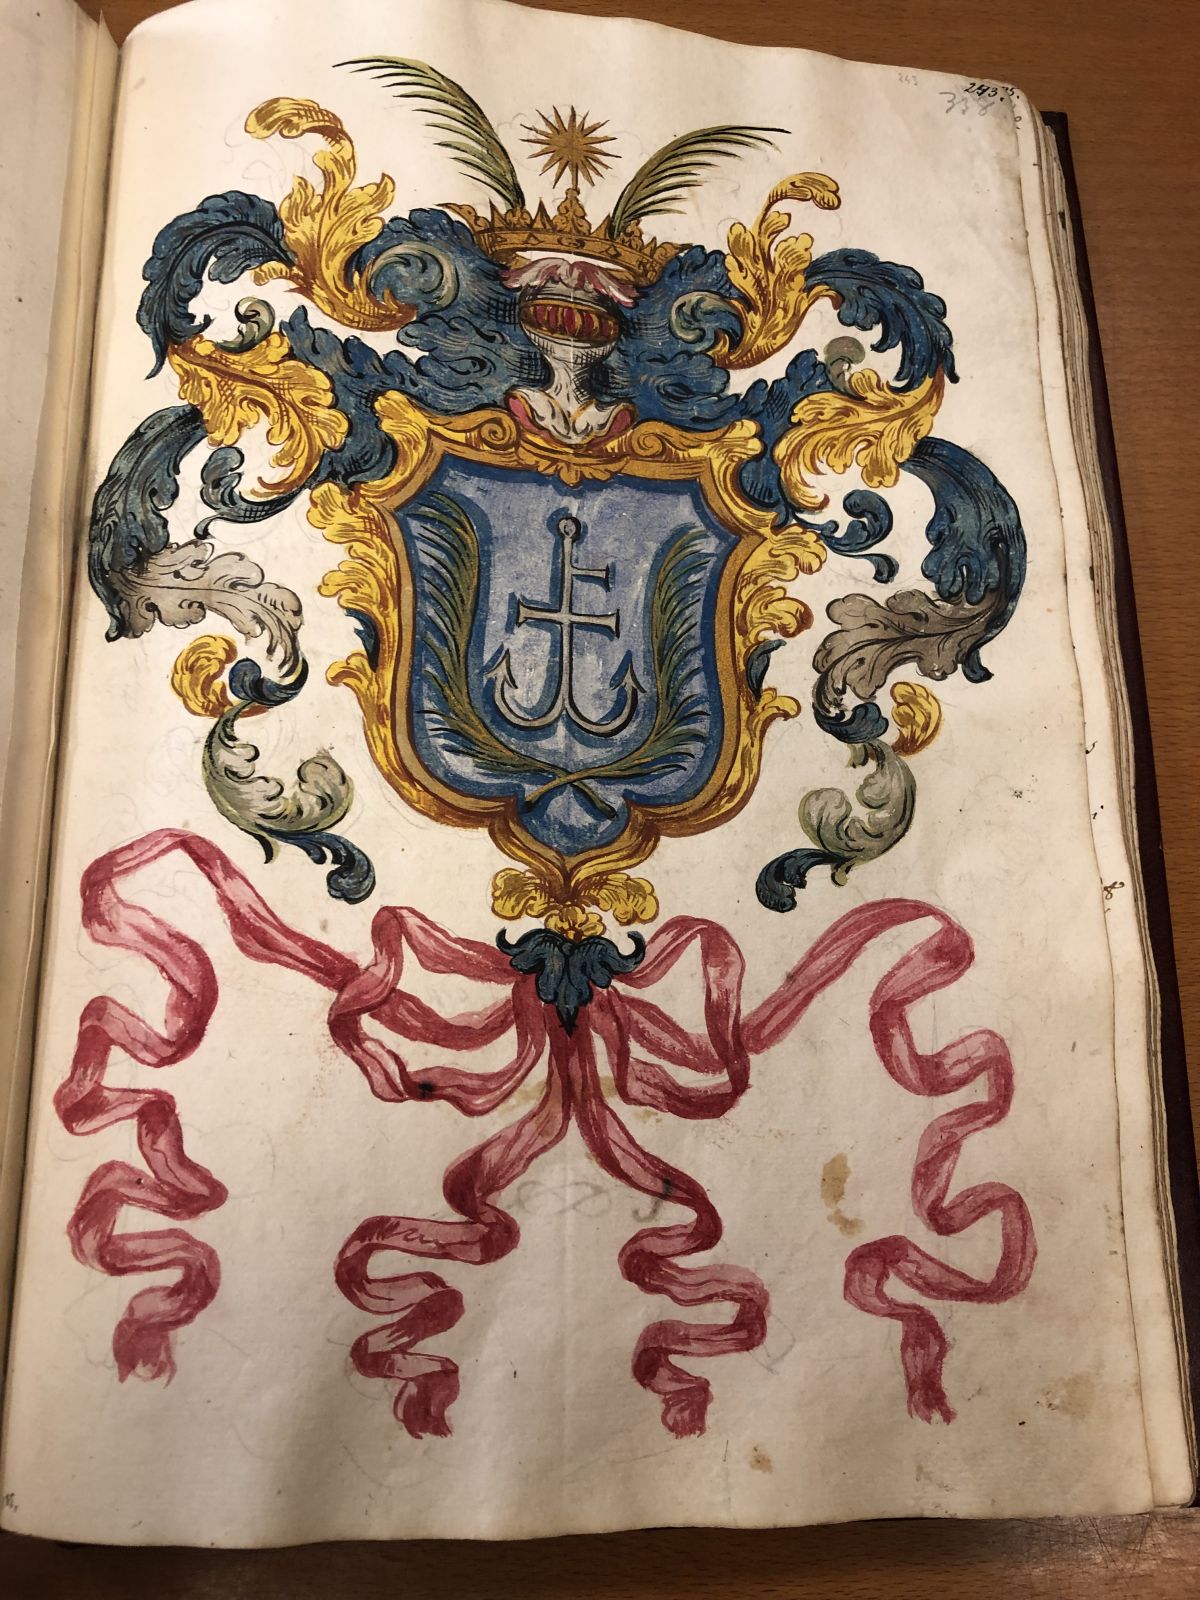 A book full of Polish coats of arms - metrics of the Polish nation in the Archive of the University of Padua